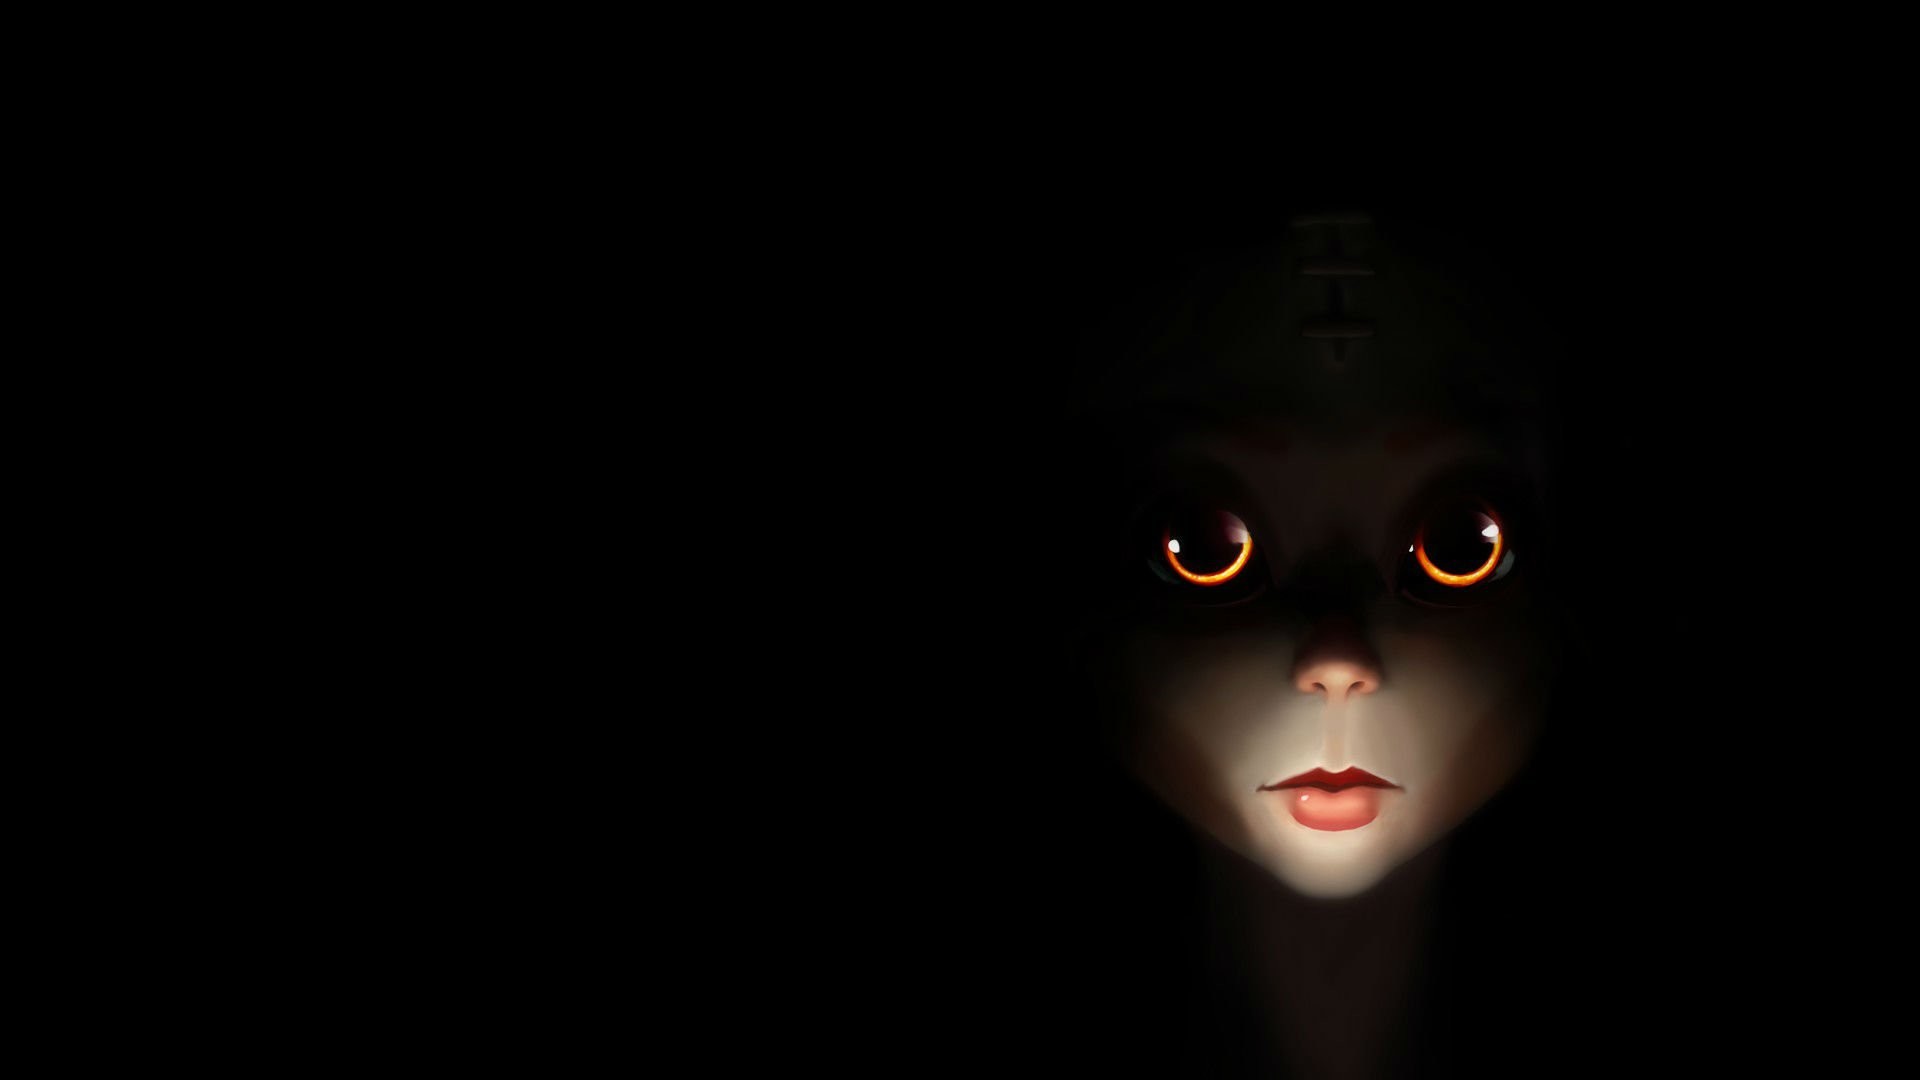 scary wallpapers,face,black,darkness,head,nose